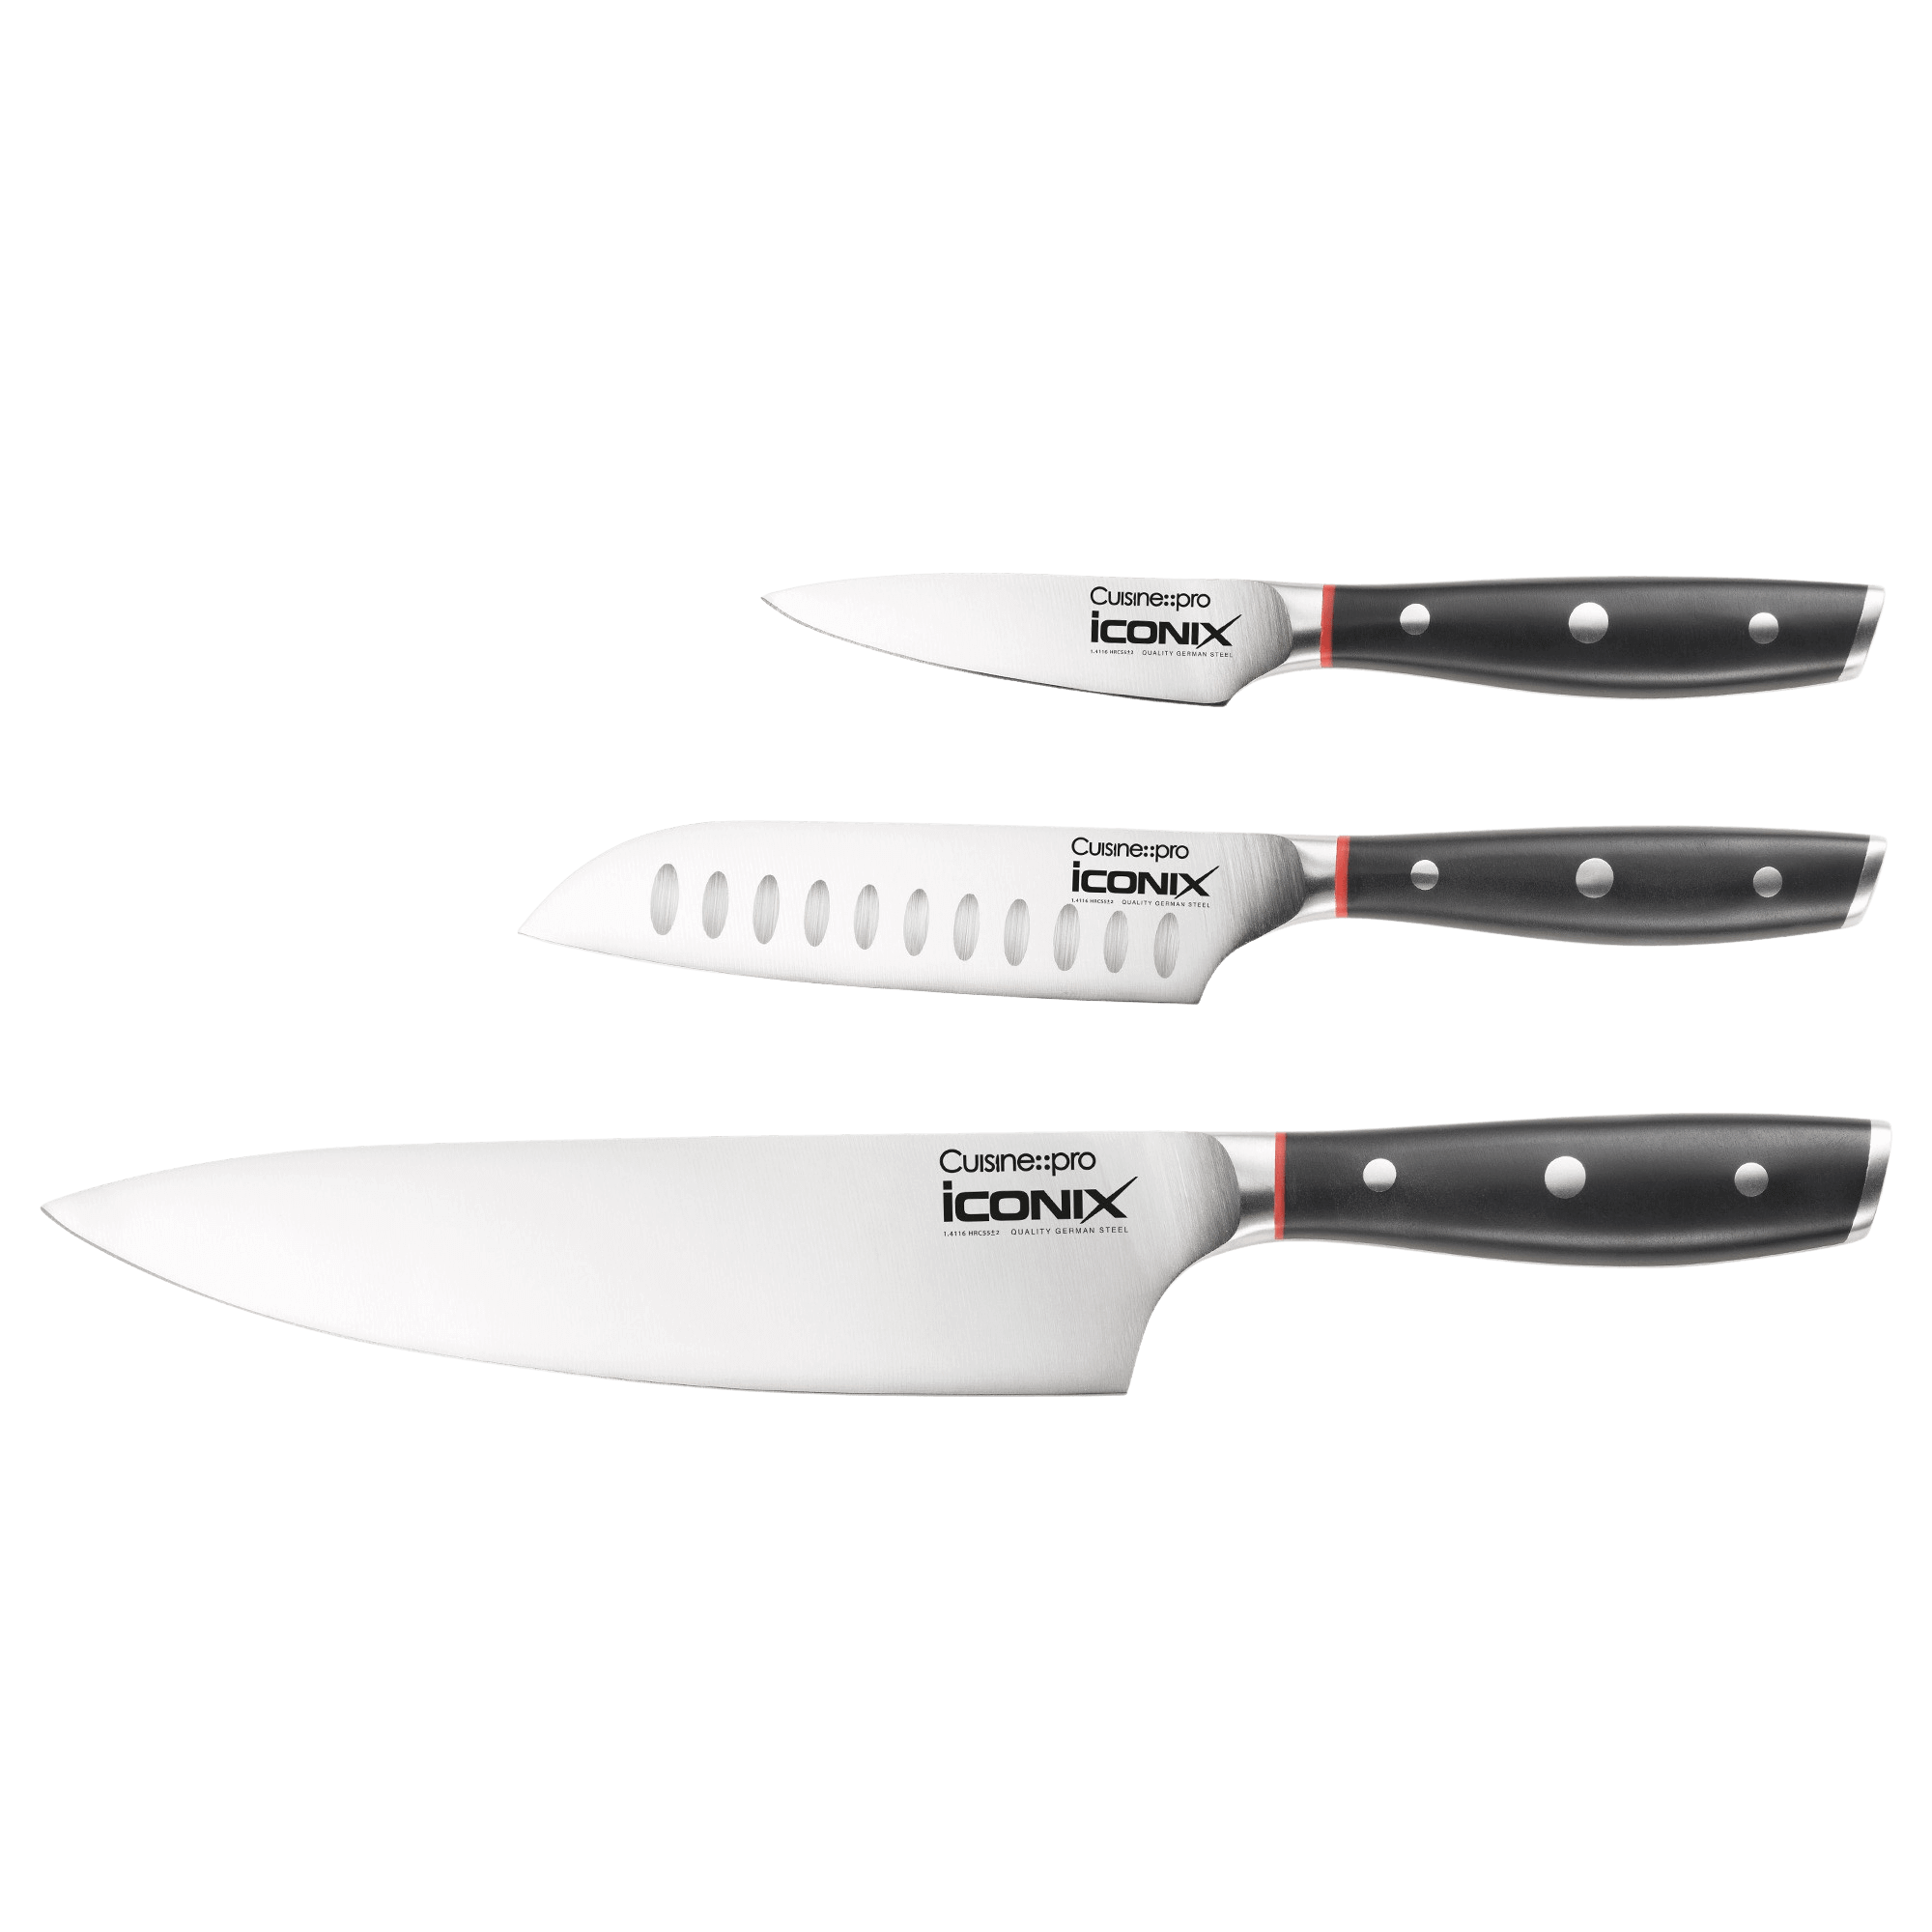 https://cdn.shopify.com/s/files/1/0622/4186/5945/products/1034453-CP-ICONIX-STARTER-KNIFE-SET_eb03d850-35cb-47f7-a644-fcb5e929fa09.png?v=1645750616&width=2000